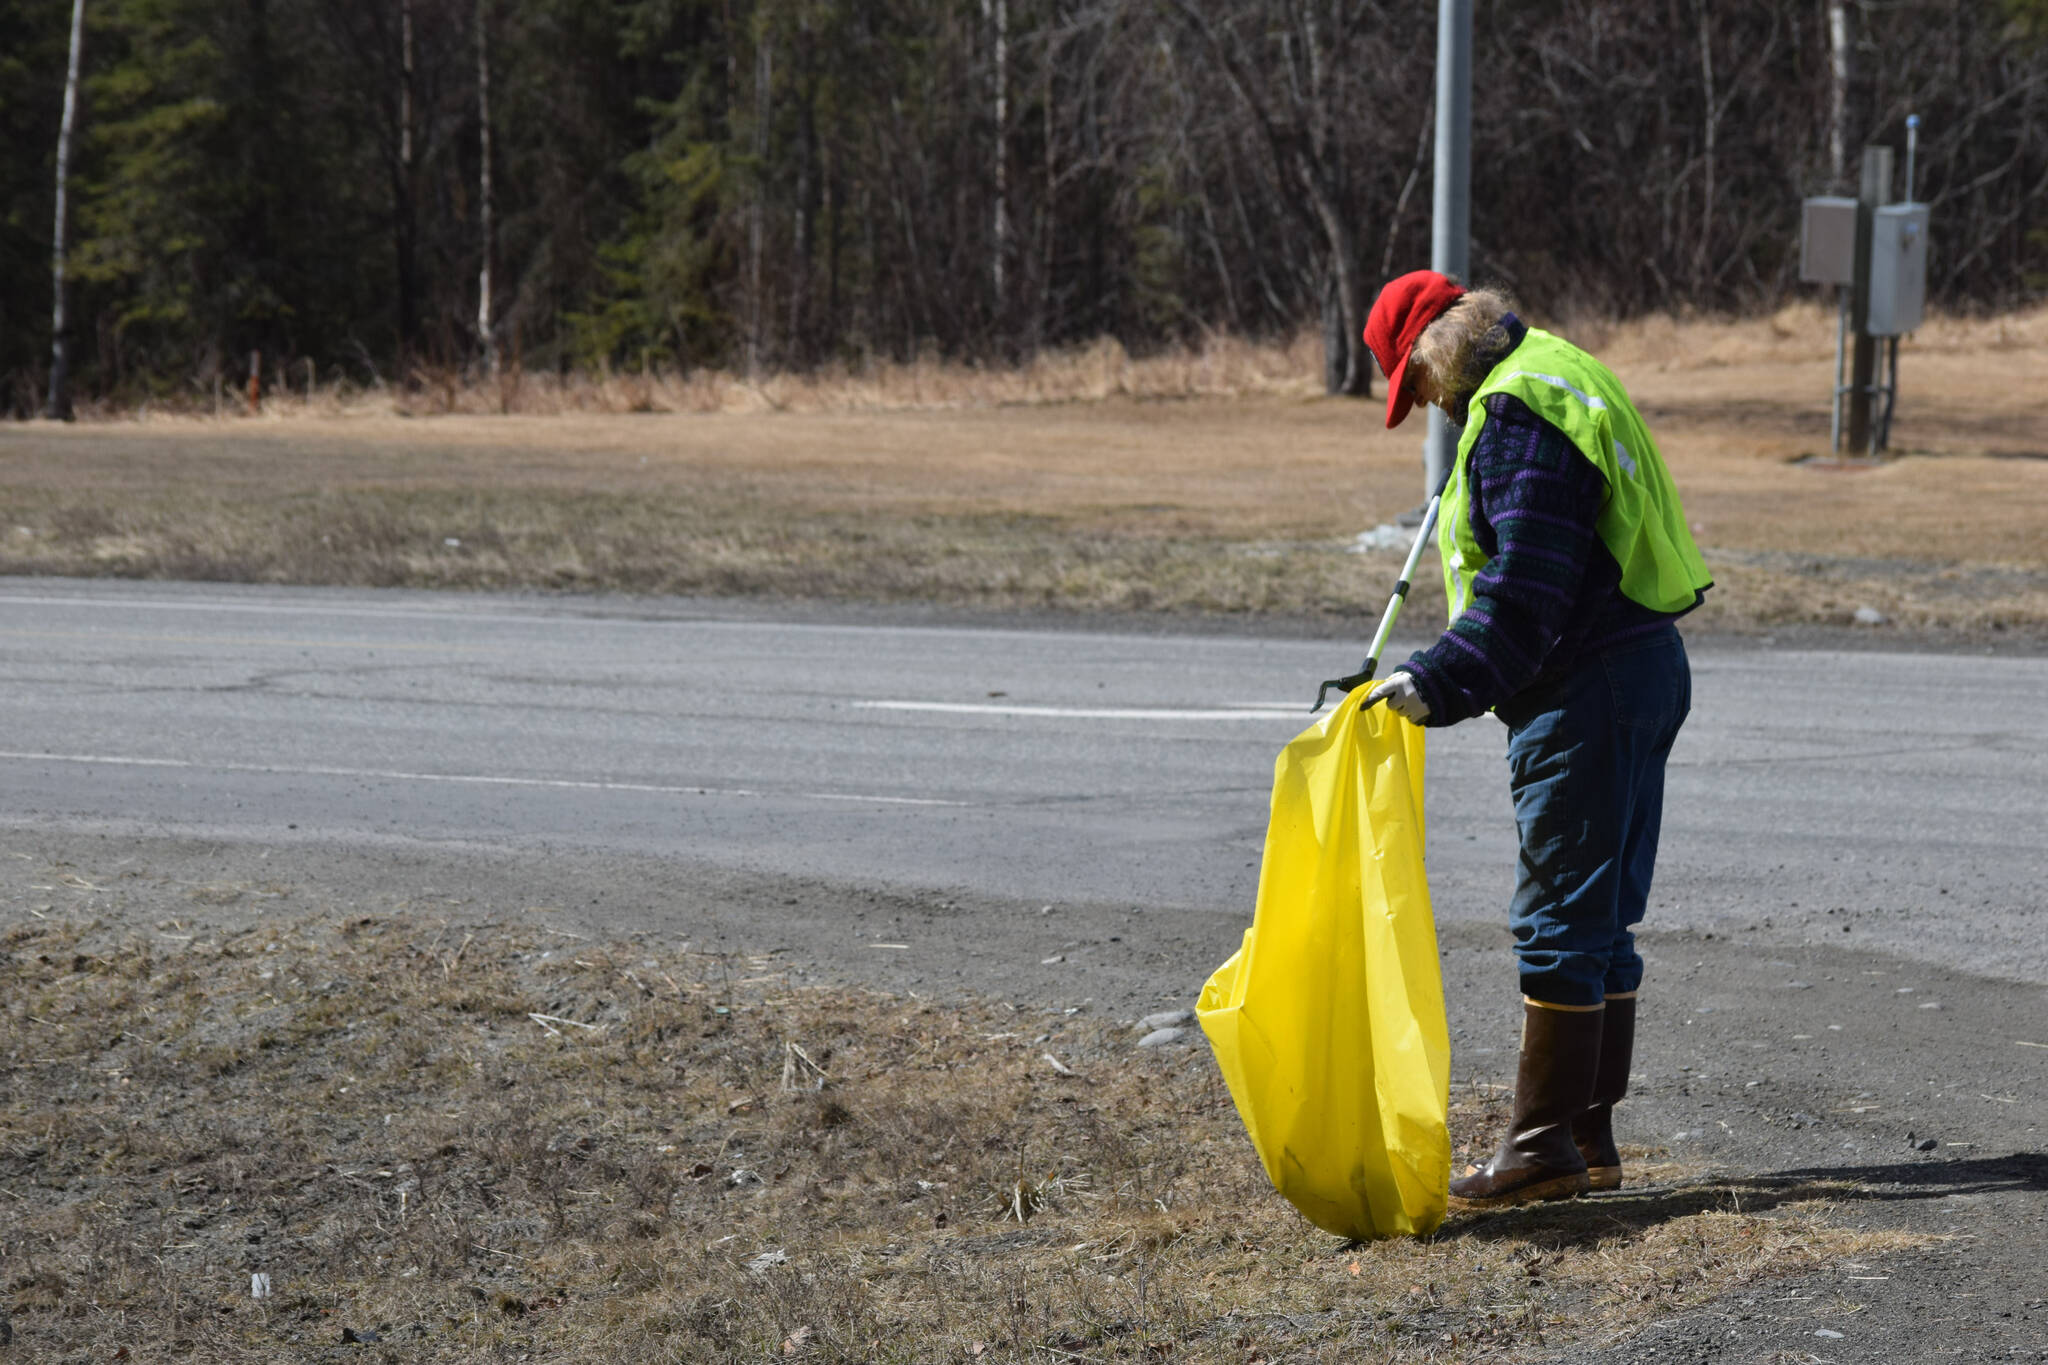 Friends of Alaska National Wildlife Refuge Vice President and Outreach Chair Poppy Benson collects litter from the side of the highway at the refuge in Soldotna, Alaska on Friday, April 30, 2021. (Camille Botello/Peninsula Clarion)